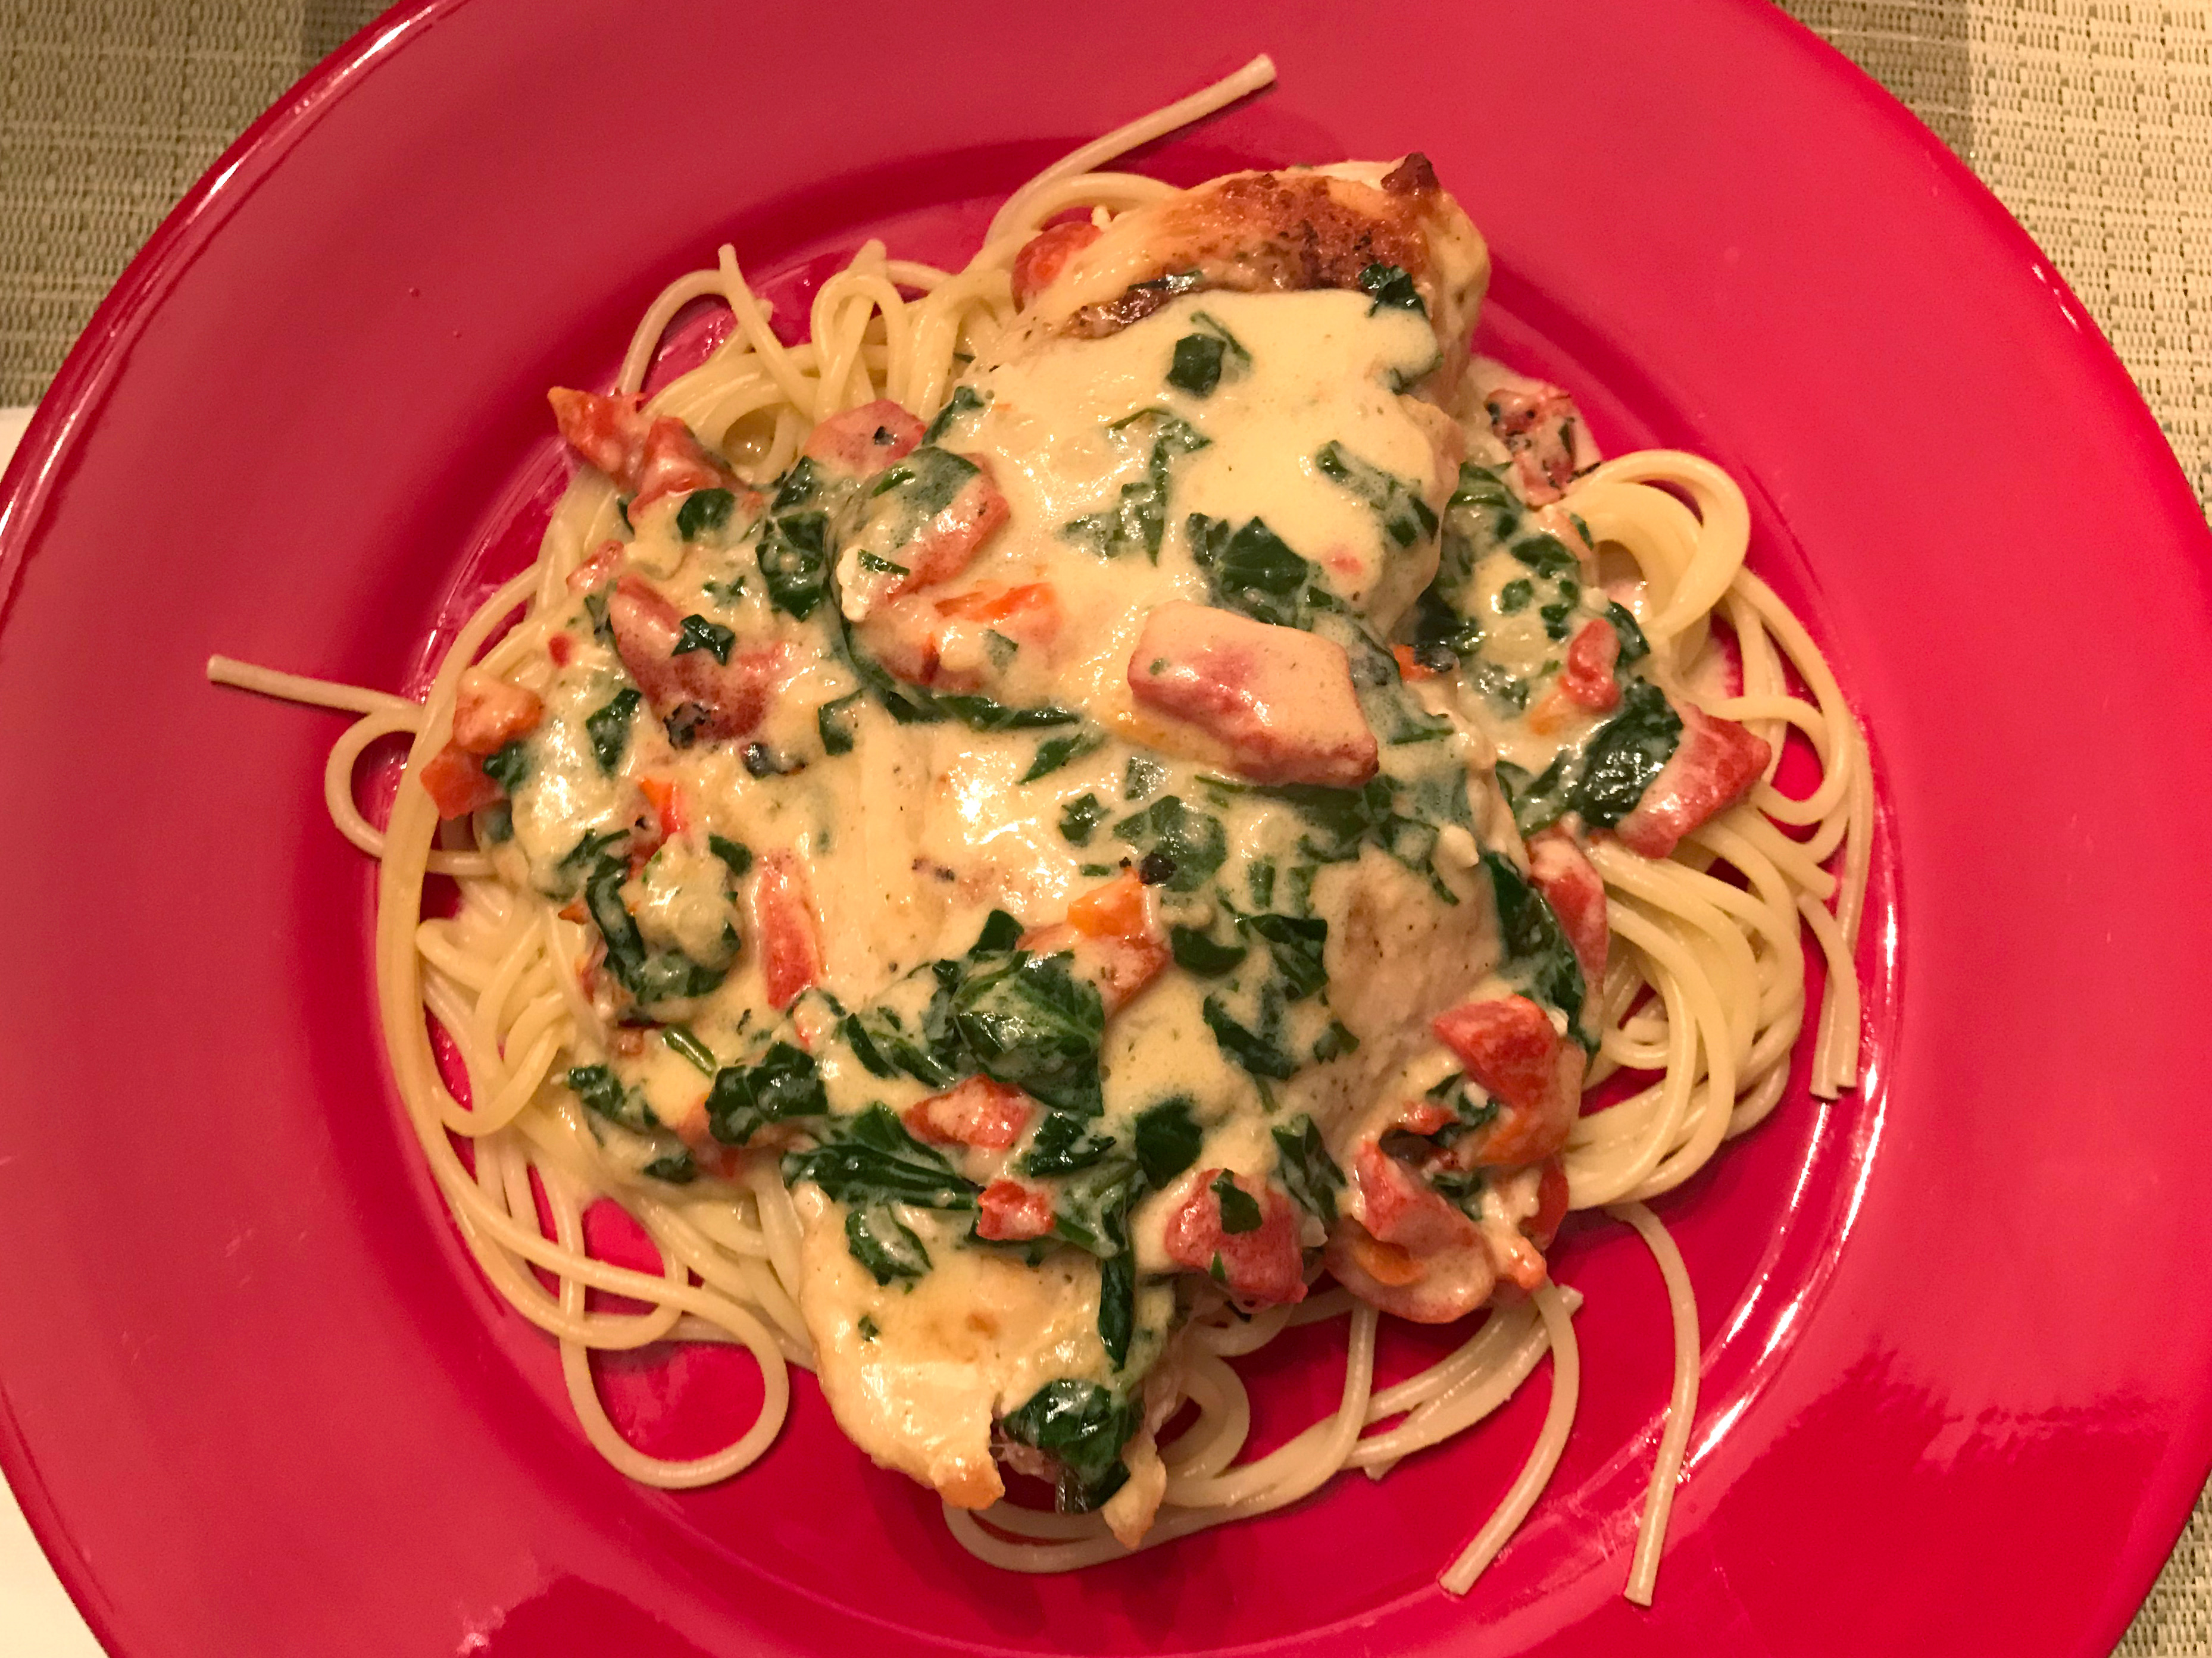 Tuscan Chicken with Spinach and Roasted Red Peppers